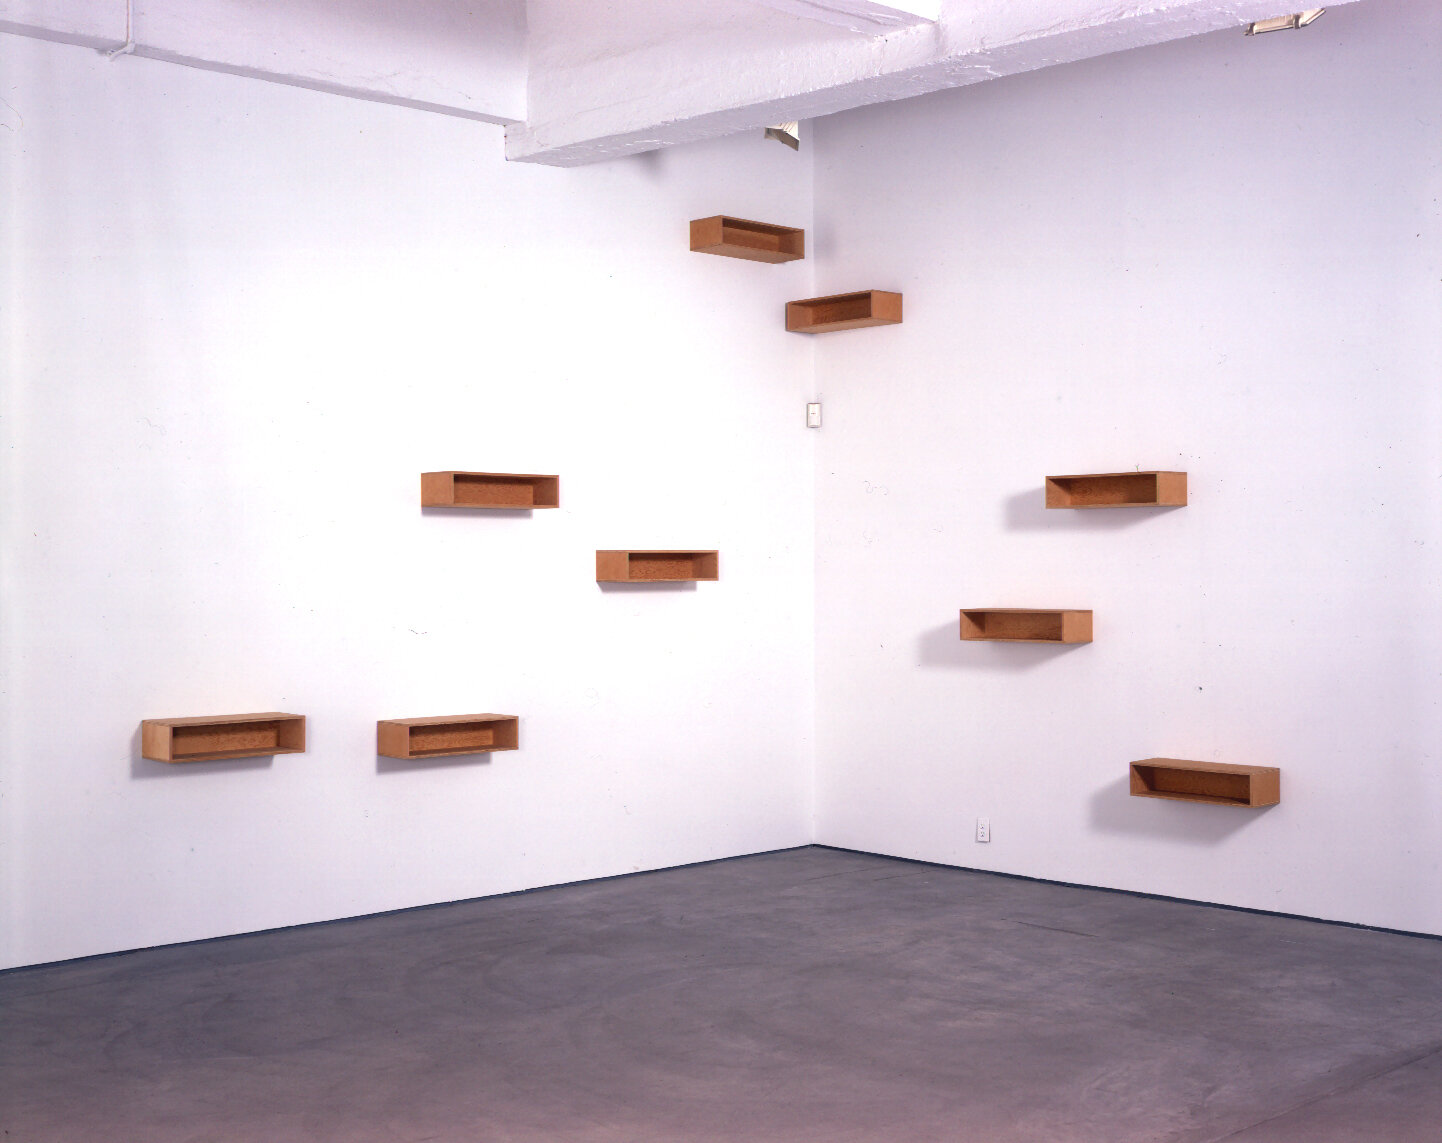  Donald Judd ,   Till Tora , 1976, plywood, 9 units, each: 6 x 24 x 9 in. (15.24 x 60.96 x 22.86 cm); installation view,  Donald Judd , Paula Cooper Gallery, New York, March 27 – May 4, 2002. Collection of Jill and Peter Kraus, New York, NY. 